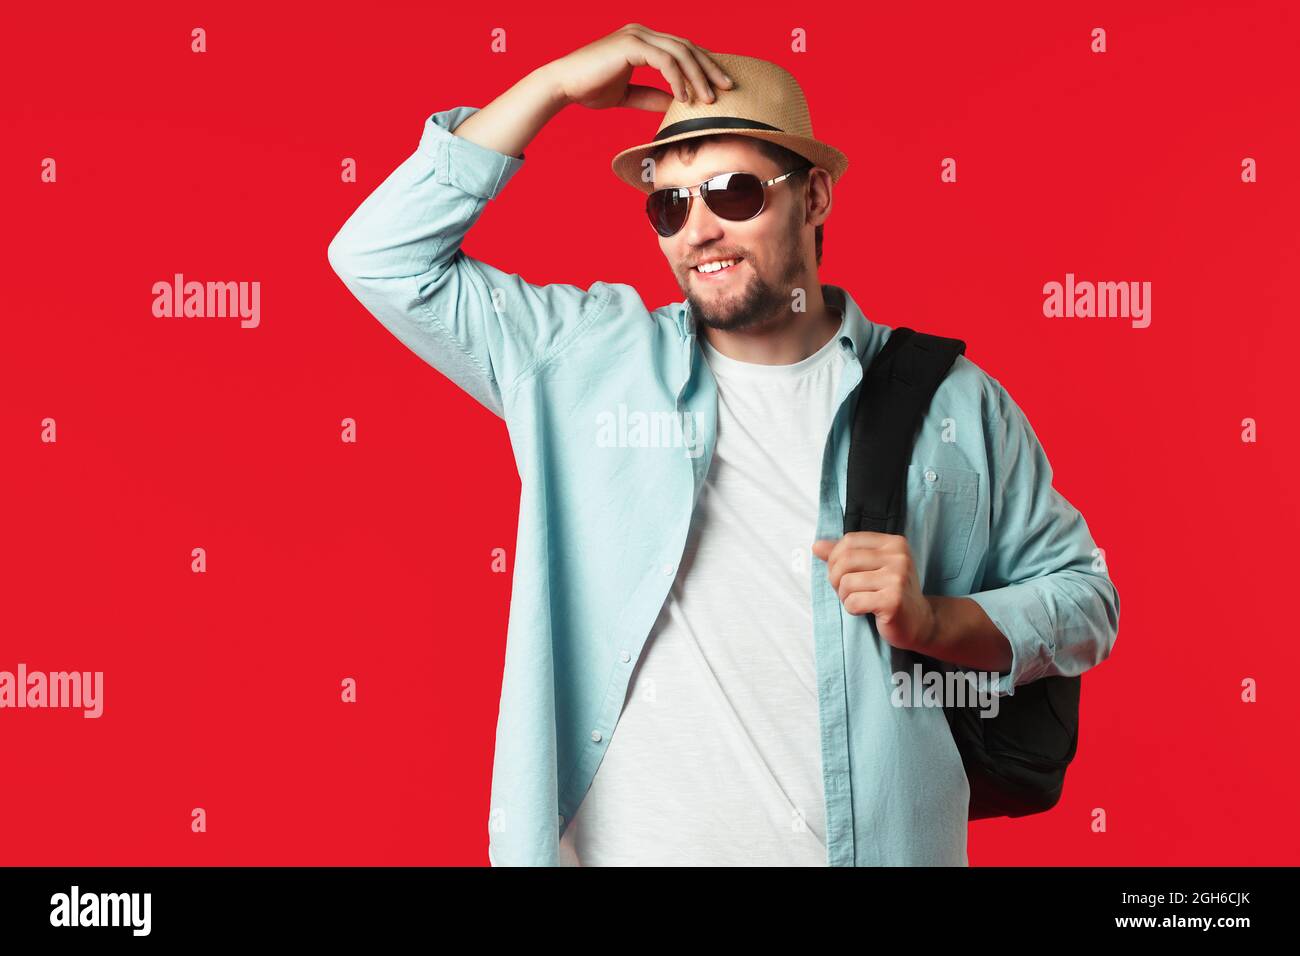 This is a portrait of a man tourist in a hat and a backpack on his shoulder on a red background. Happy guy in casual clothes with sunglasses. Stock Photo